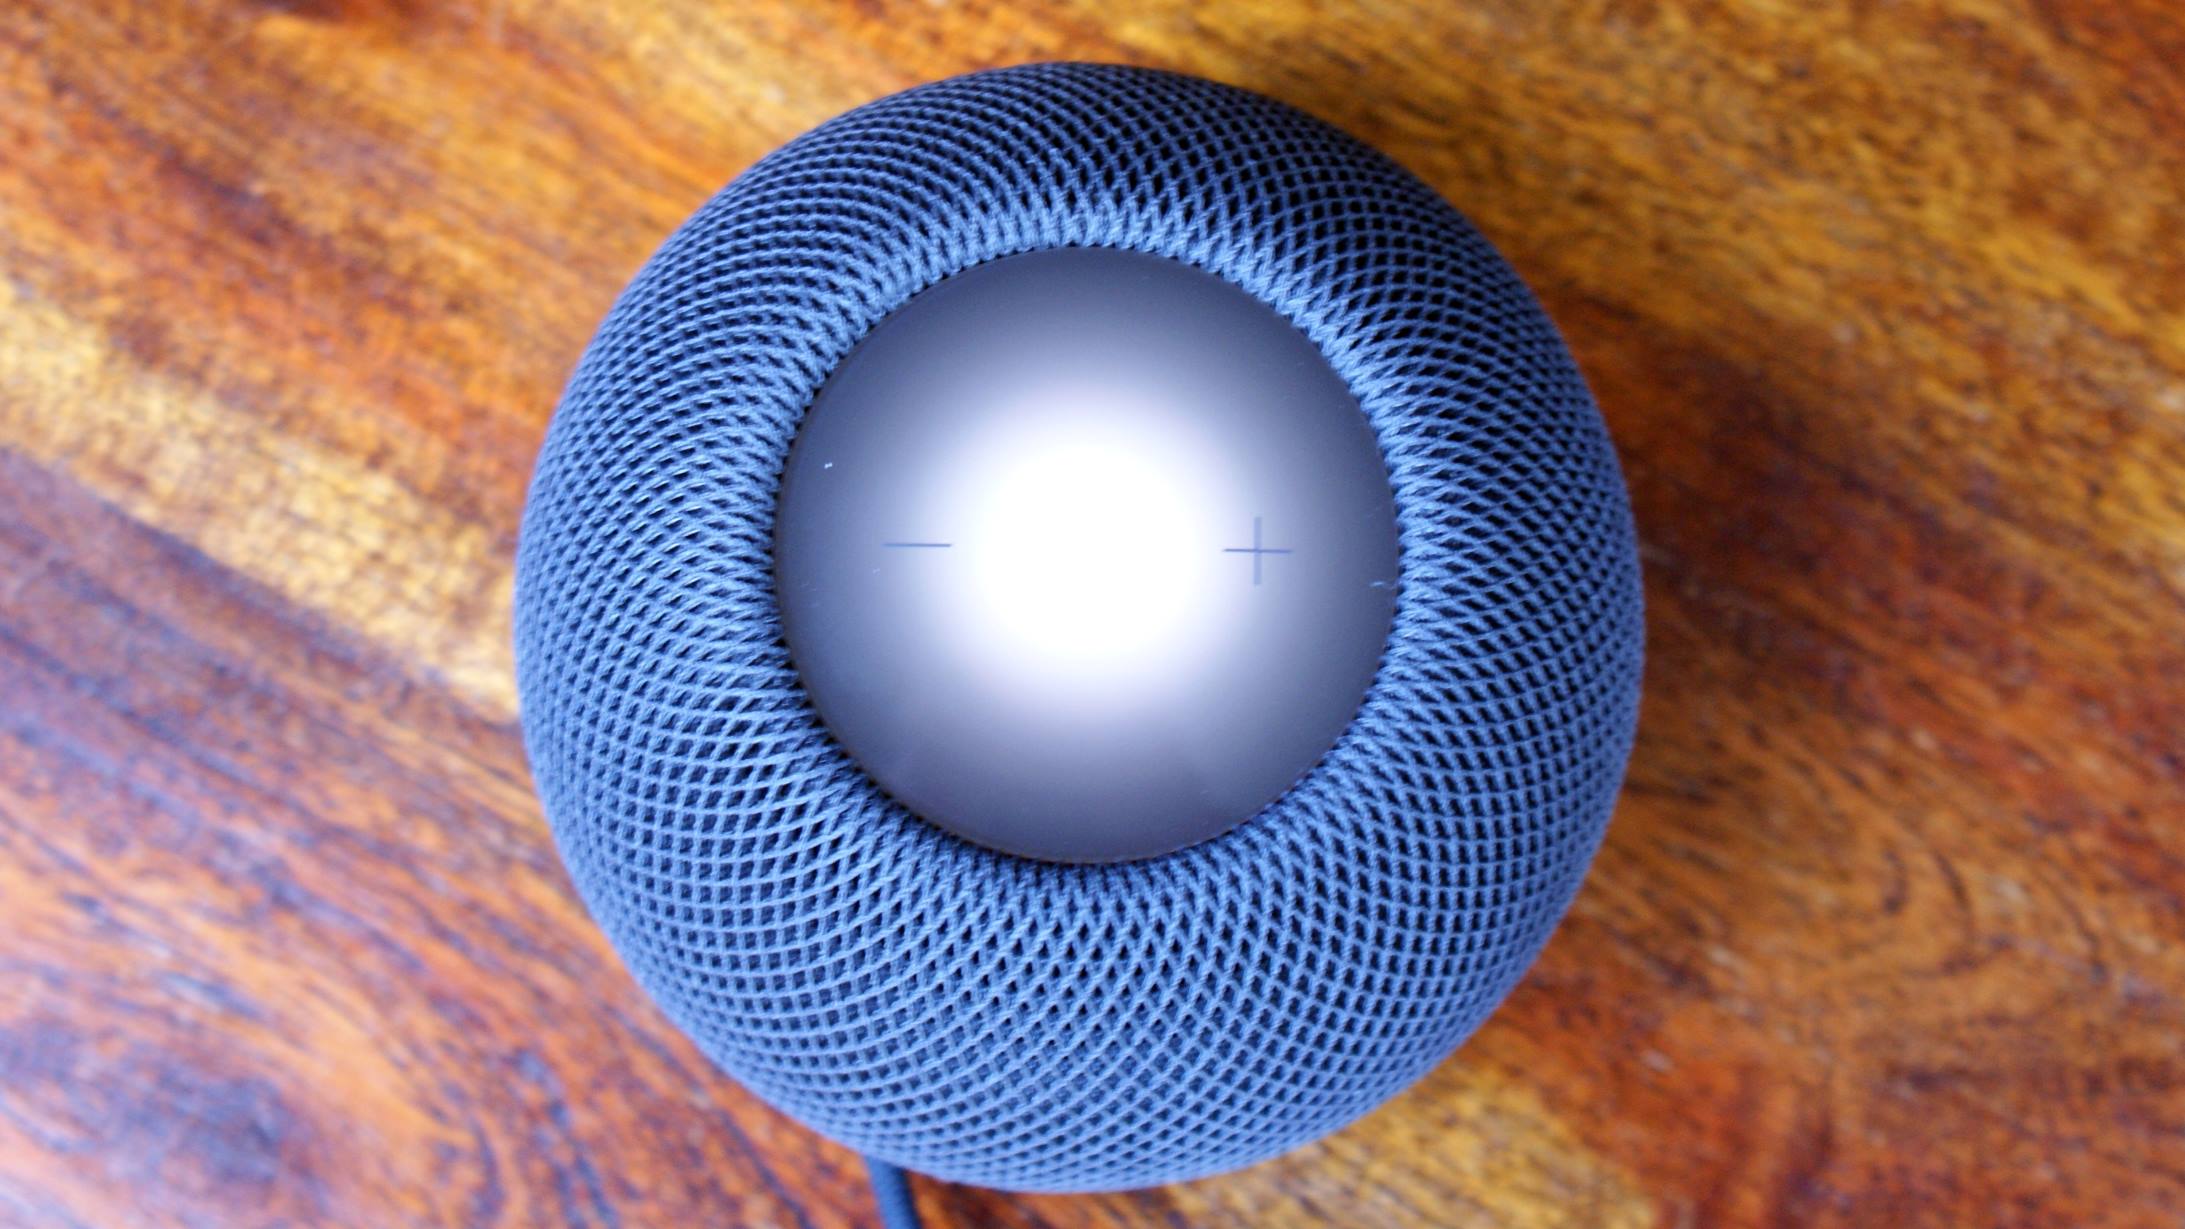 How To Connect HomePod Mini To Apple TV